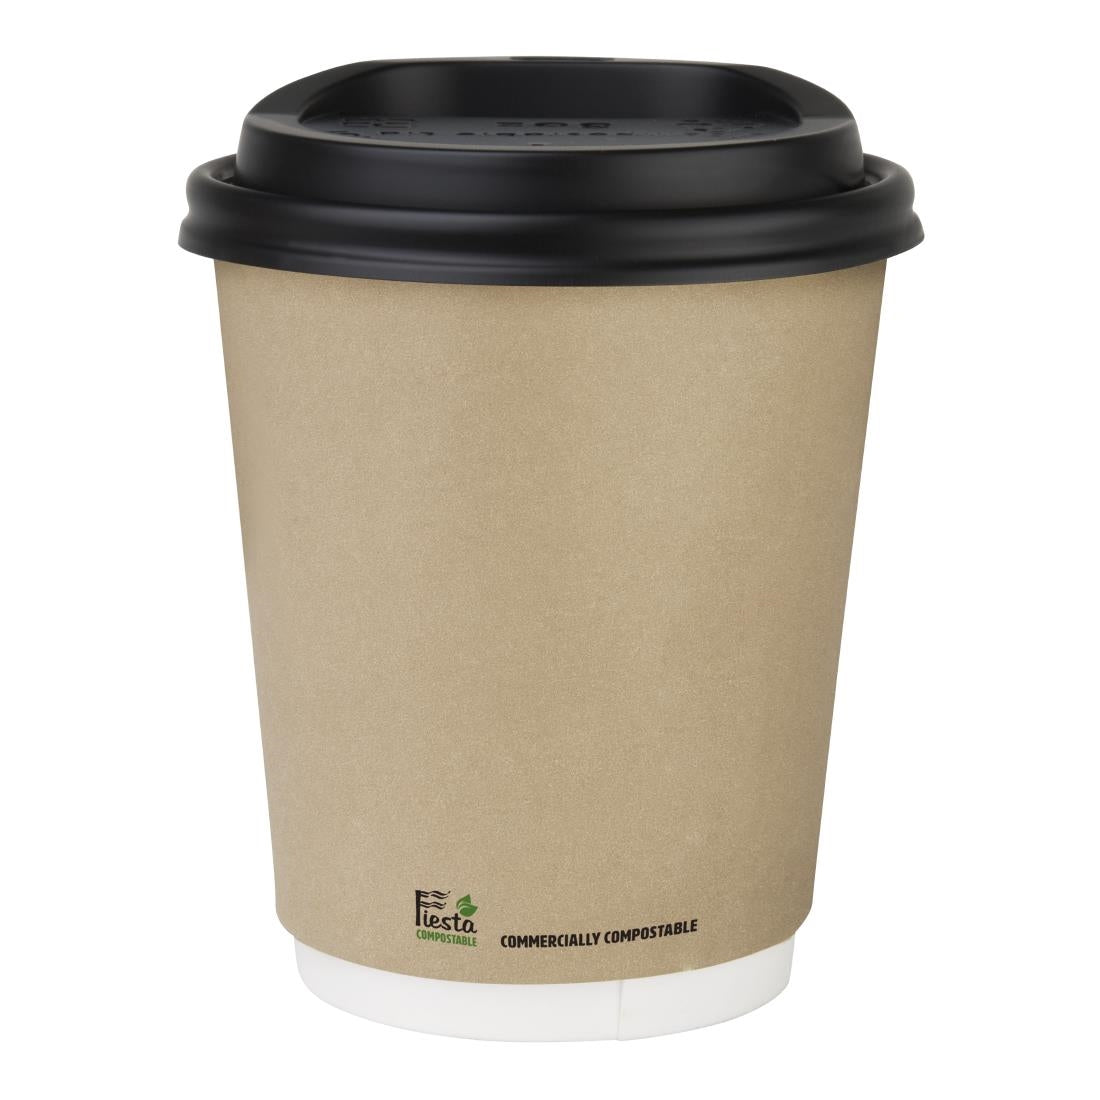 CU985 Fiesta Compostable Coffee Cups Double Wall 227ml / 8oz (Pack of 25)